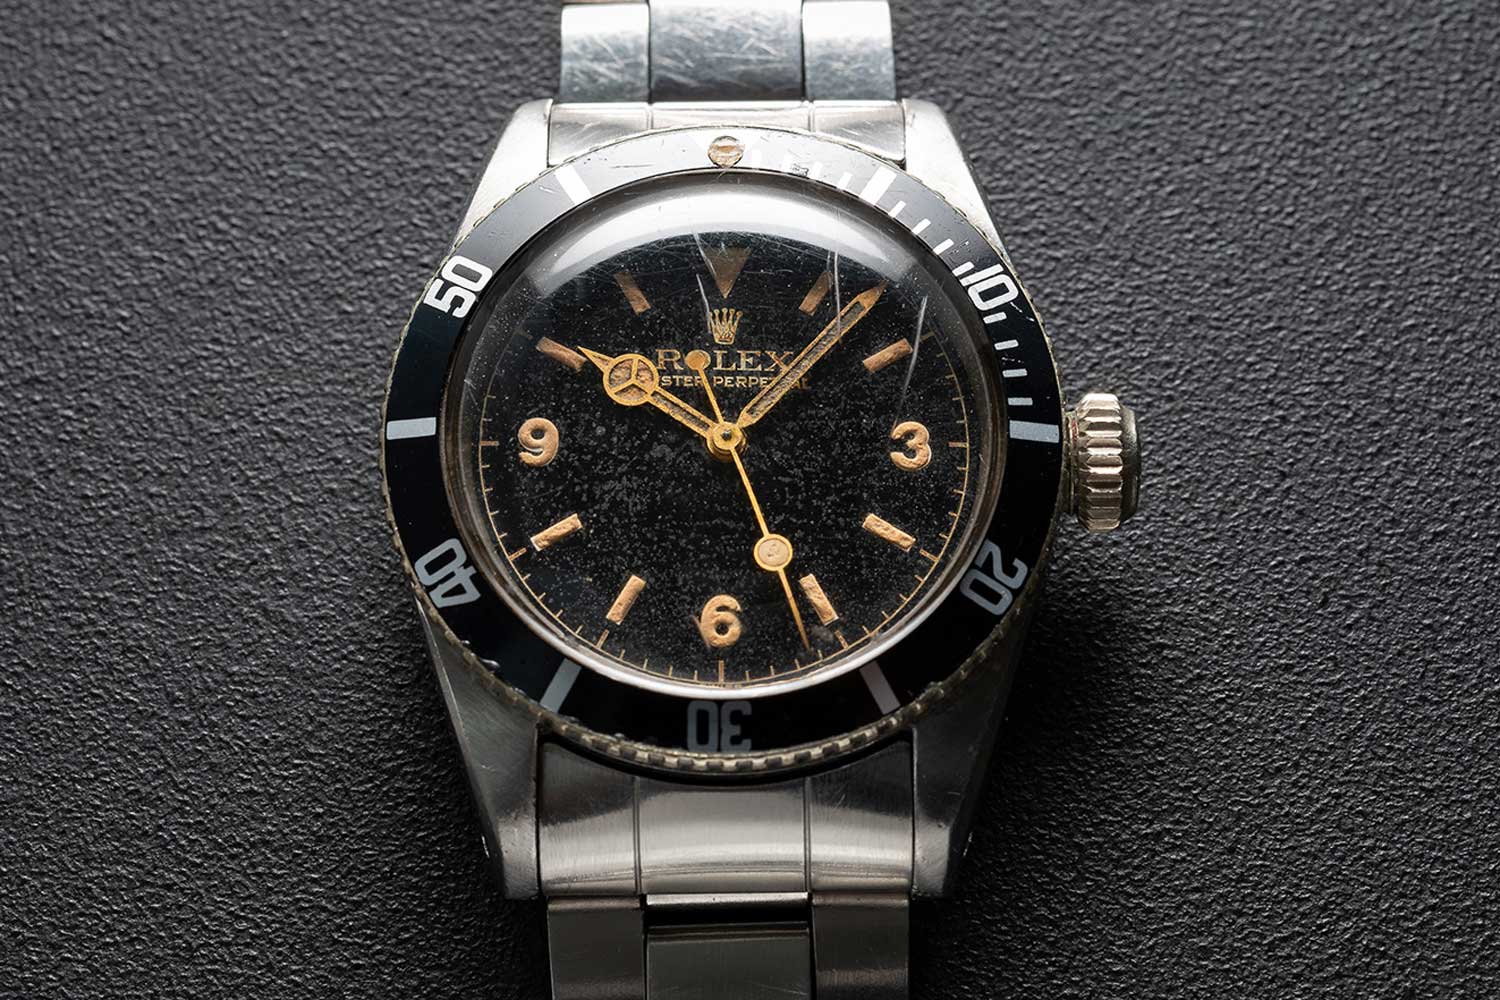 Lot 220: Rolex Big Crown reference 6200 sold for nearly CHF 600,000 (Photo by Christopher Beccan, founder of @BEXSONN)